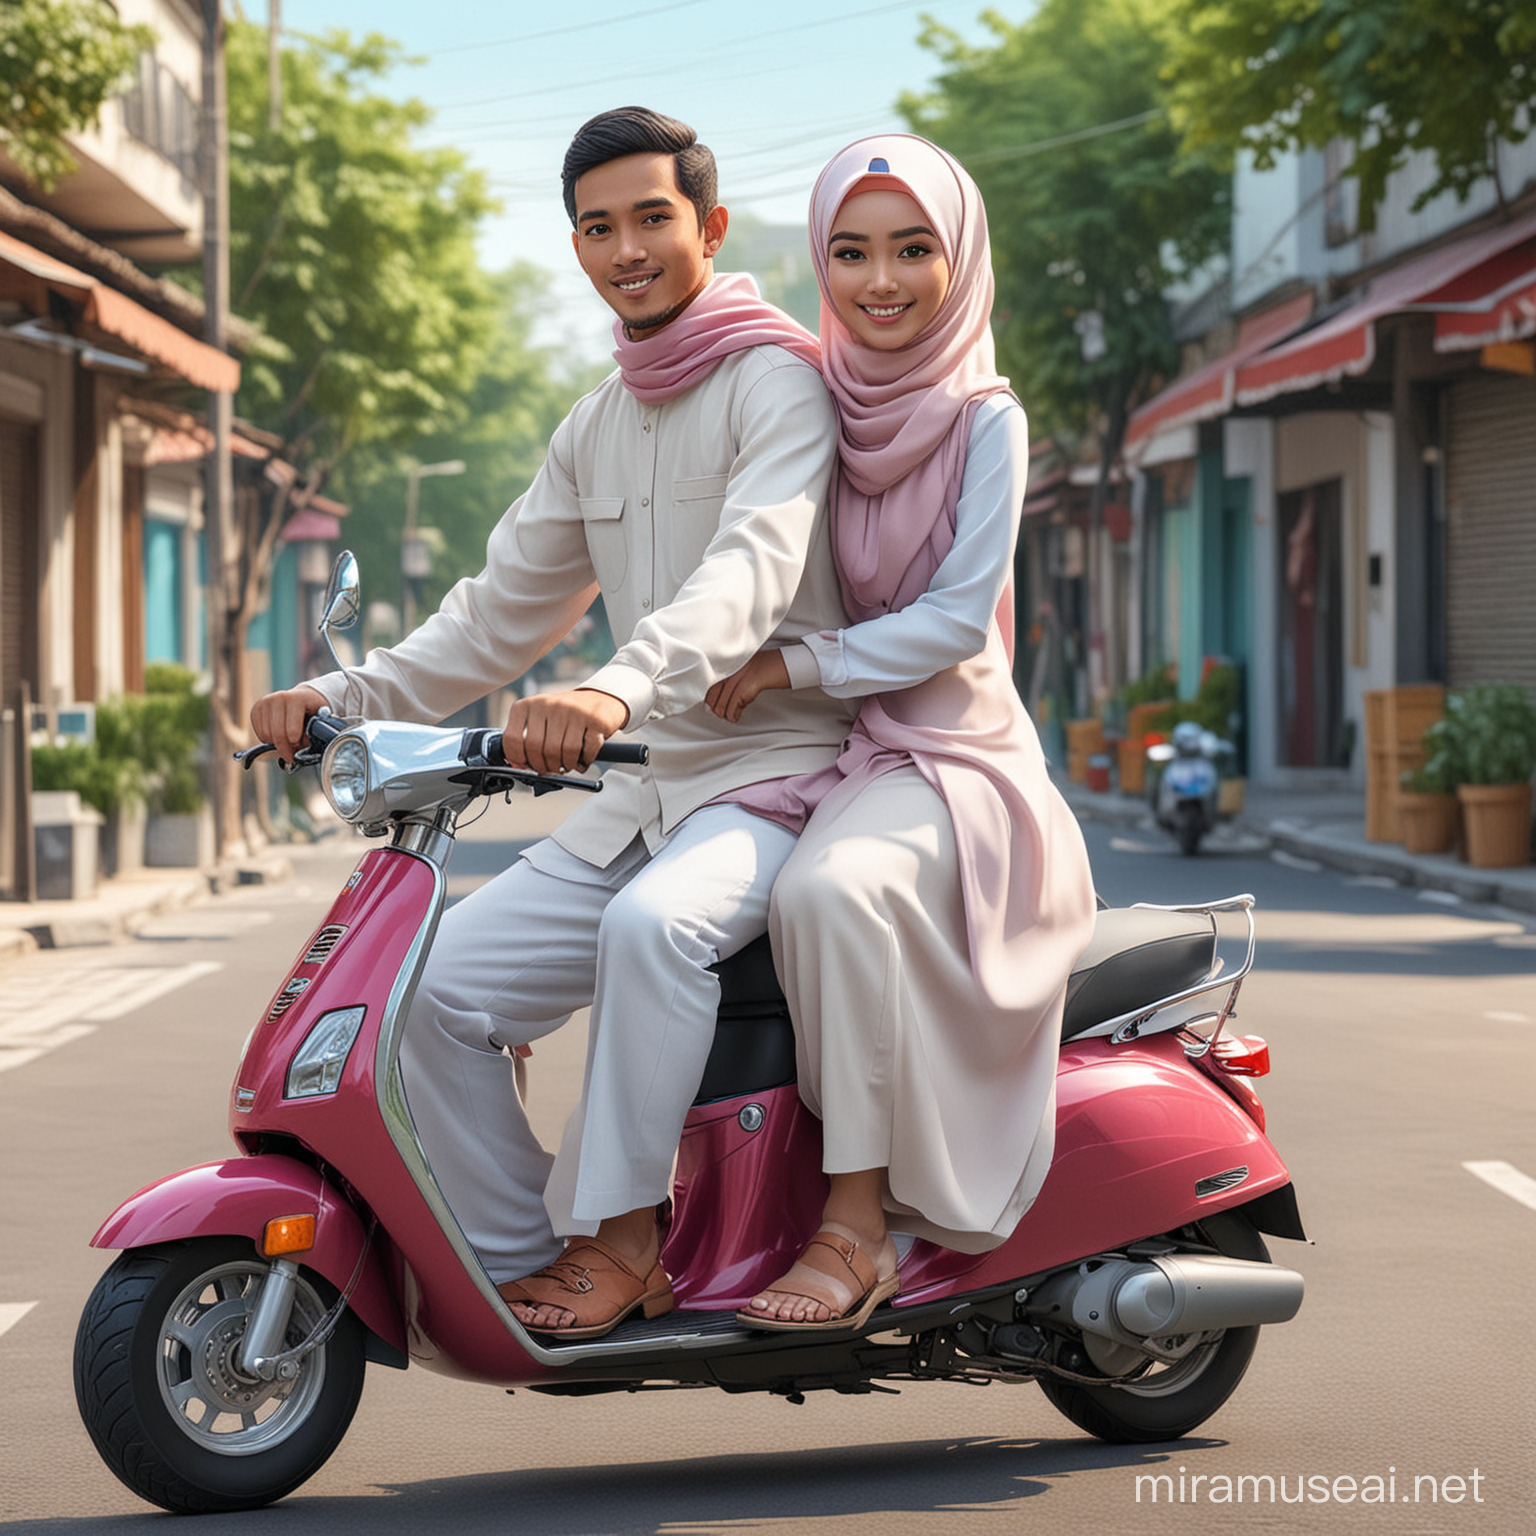 Indonesian Man Riding Scooter with HijabWearing Woman Vibrant 4D Cartoon Scene